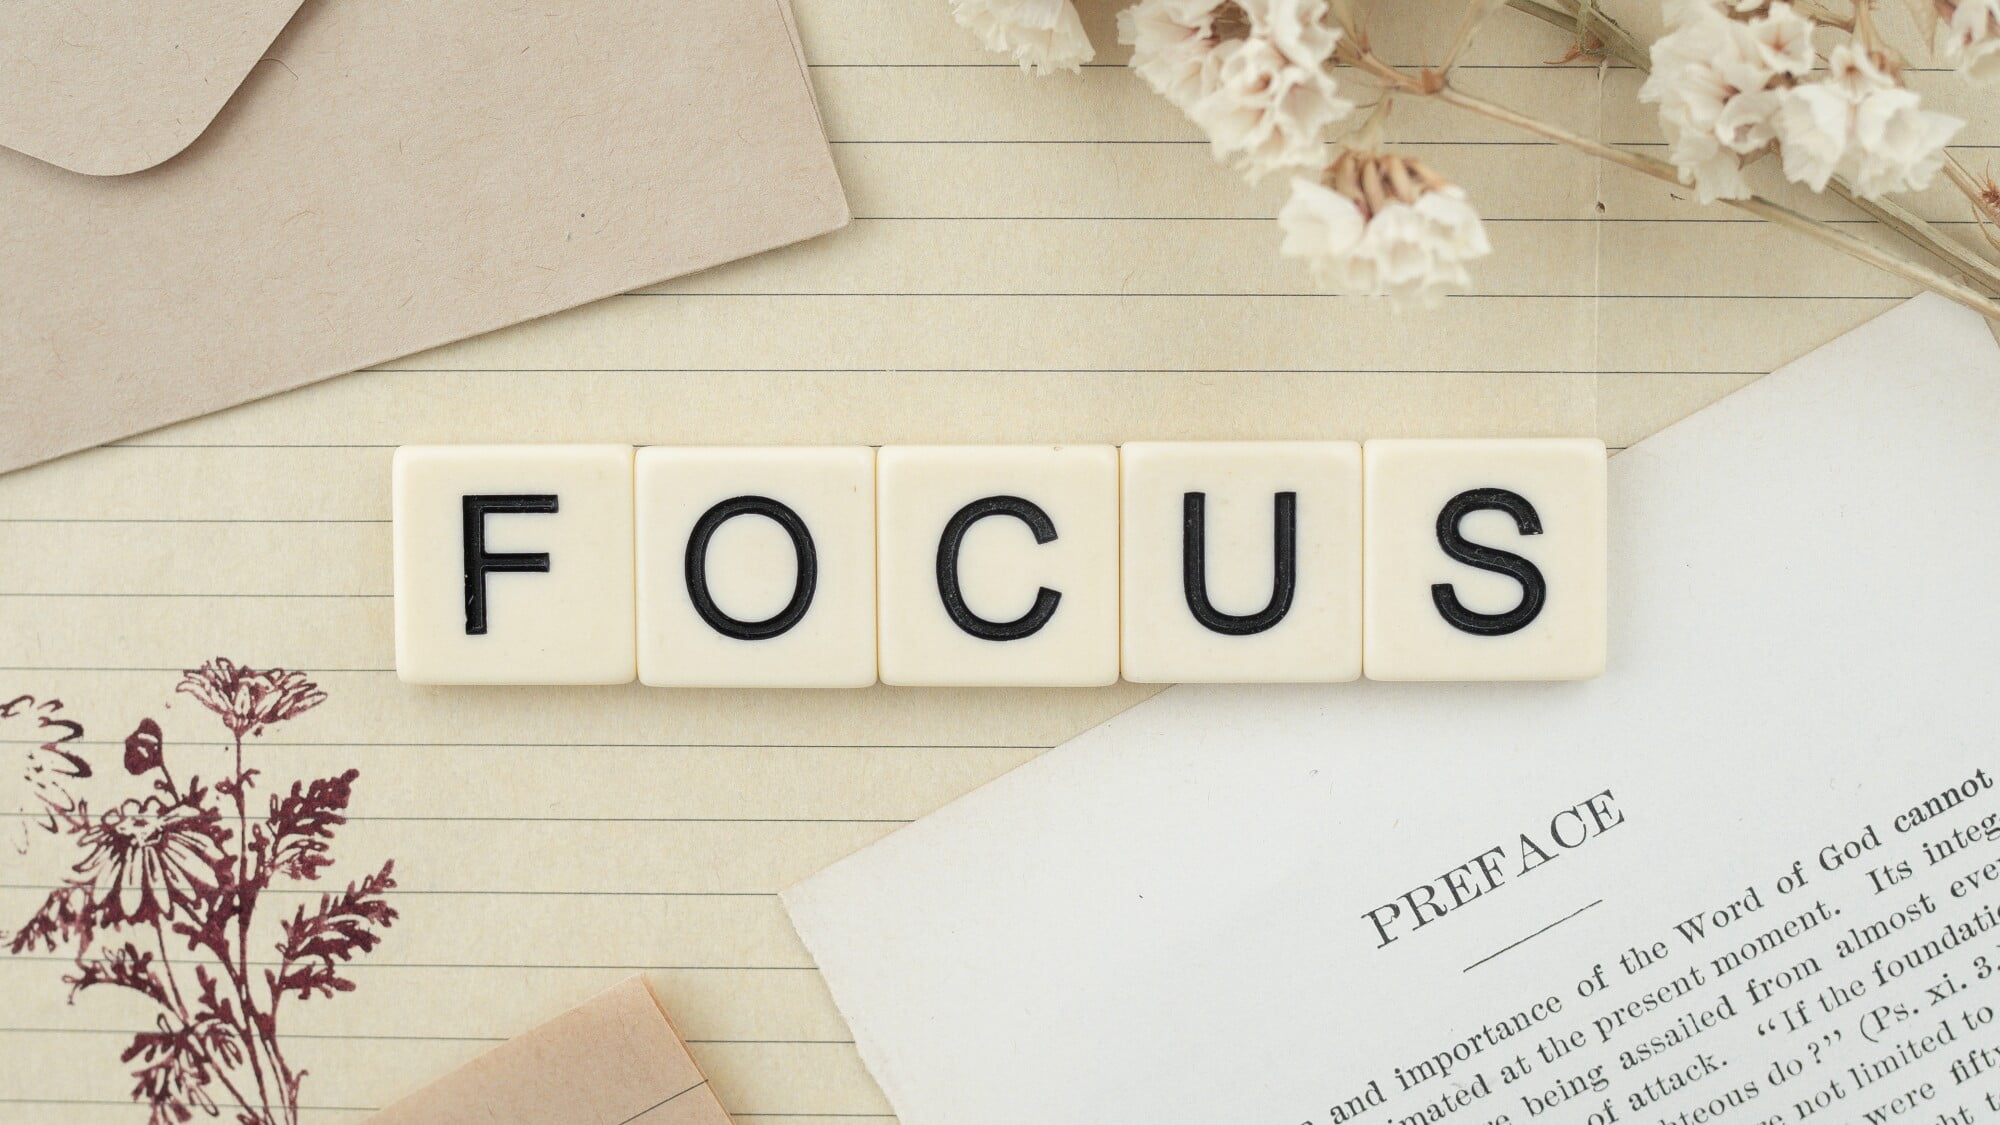 Over the past few years, it's been more difficult for people to focus on tasks. Learn how to improve focus easily right here.